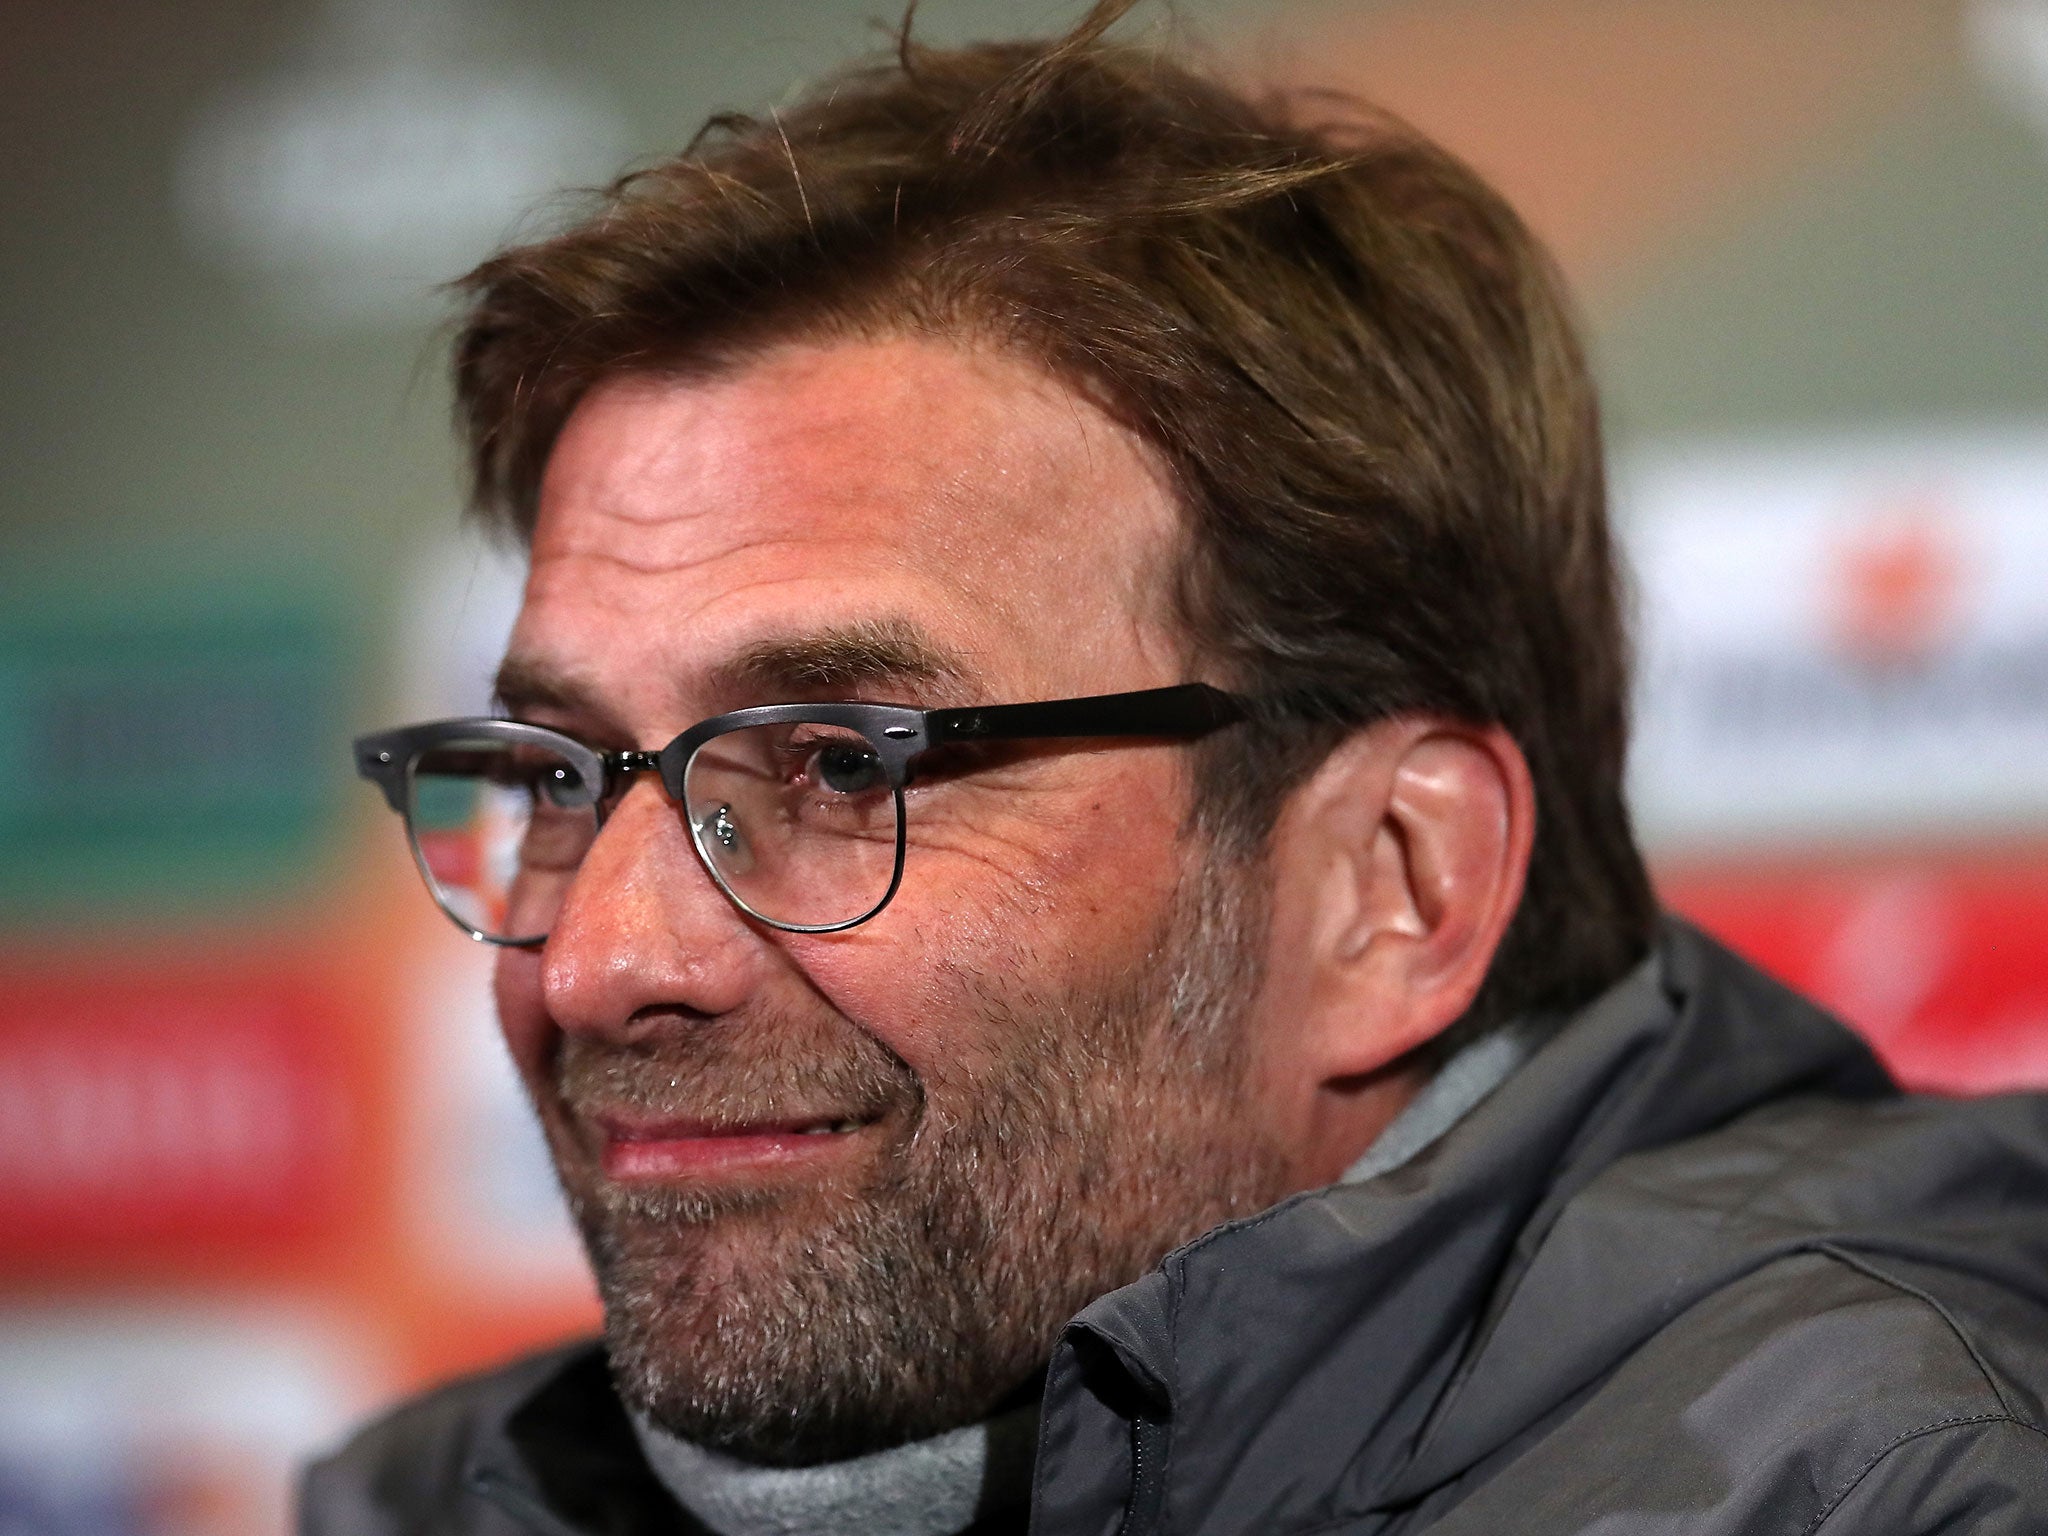 Jurgen Klopp believes Manchester United can still get back into their Europa League tie against his Liverpool side